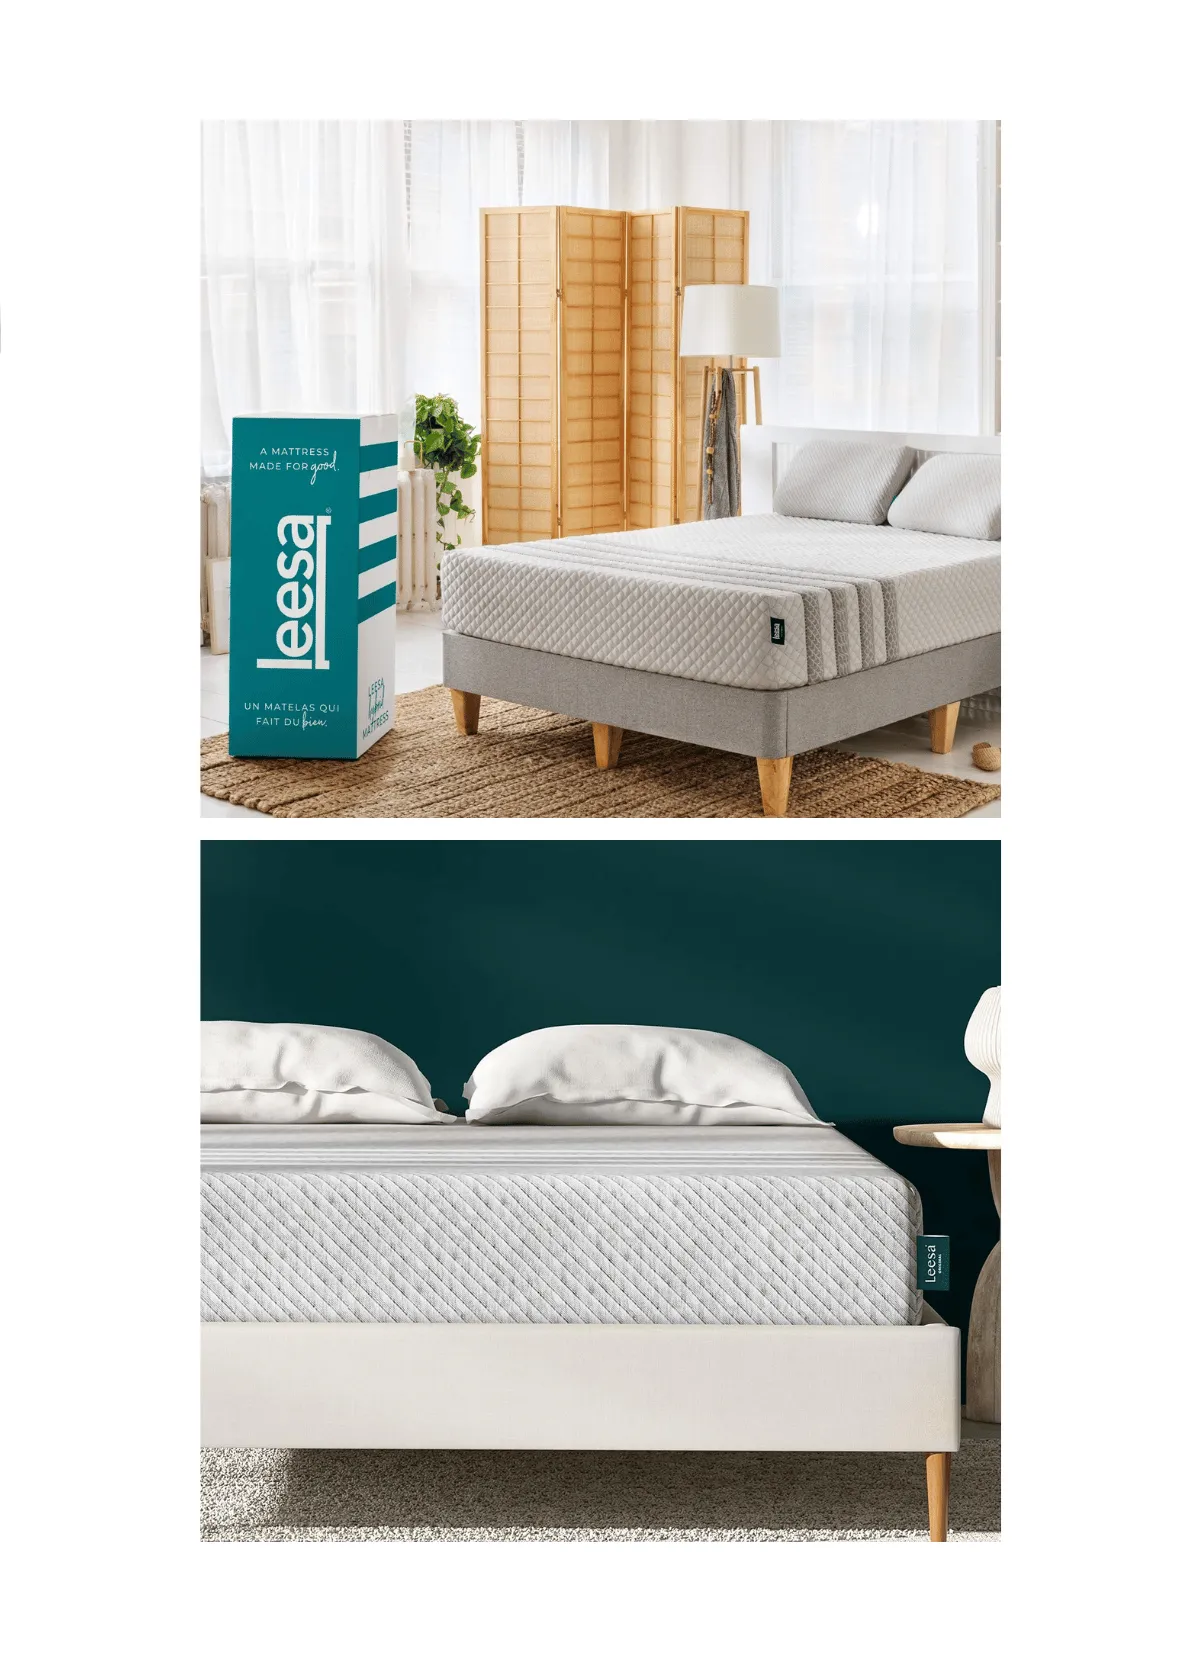 "Leesa Mattress | Reviews of the Best Beds of a Top-Rated Brand"